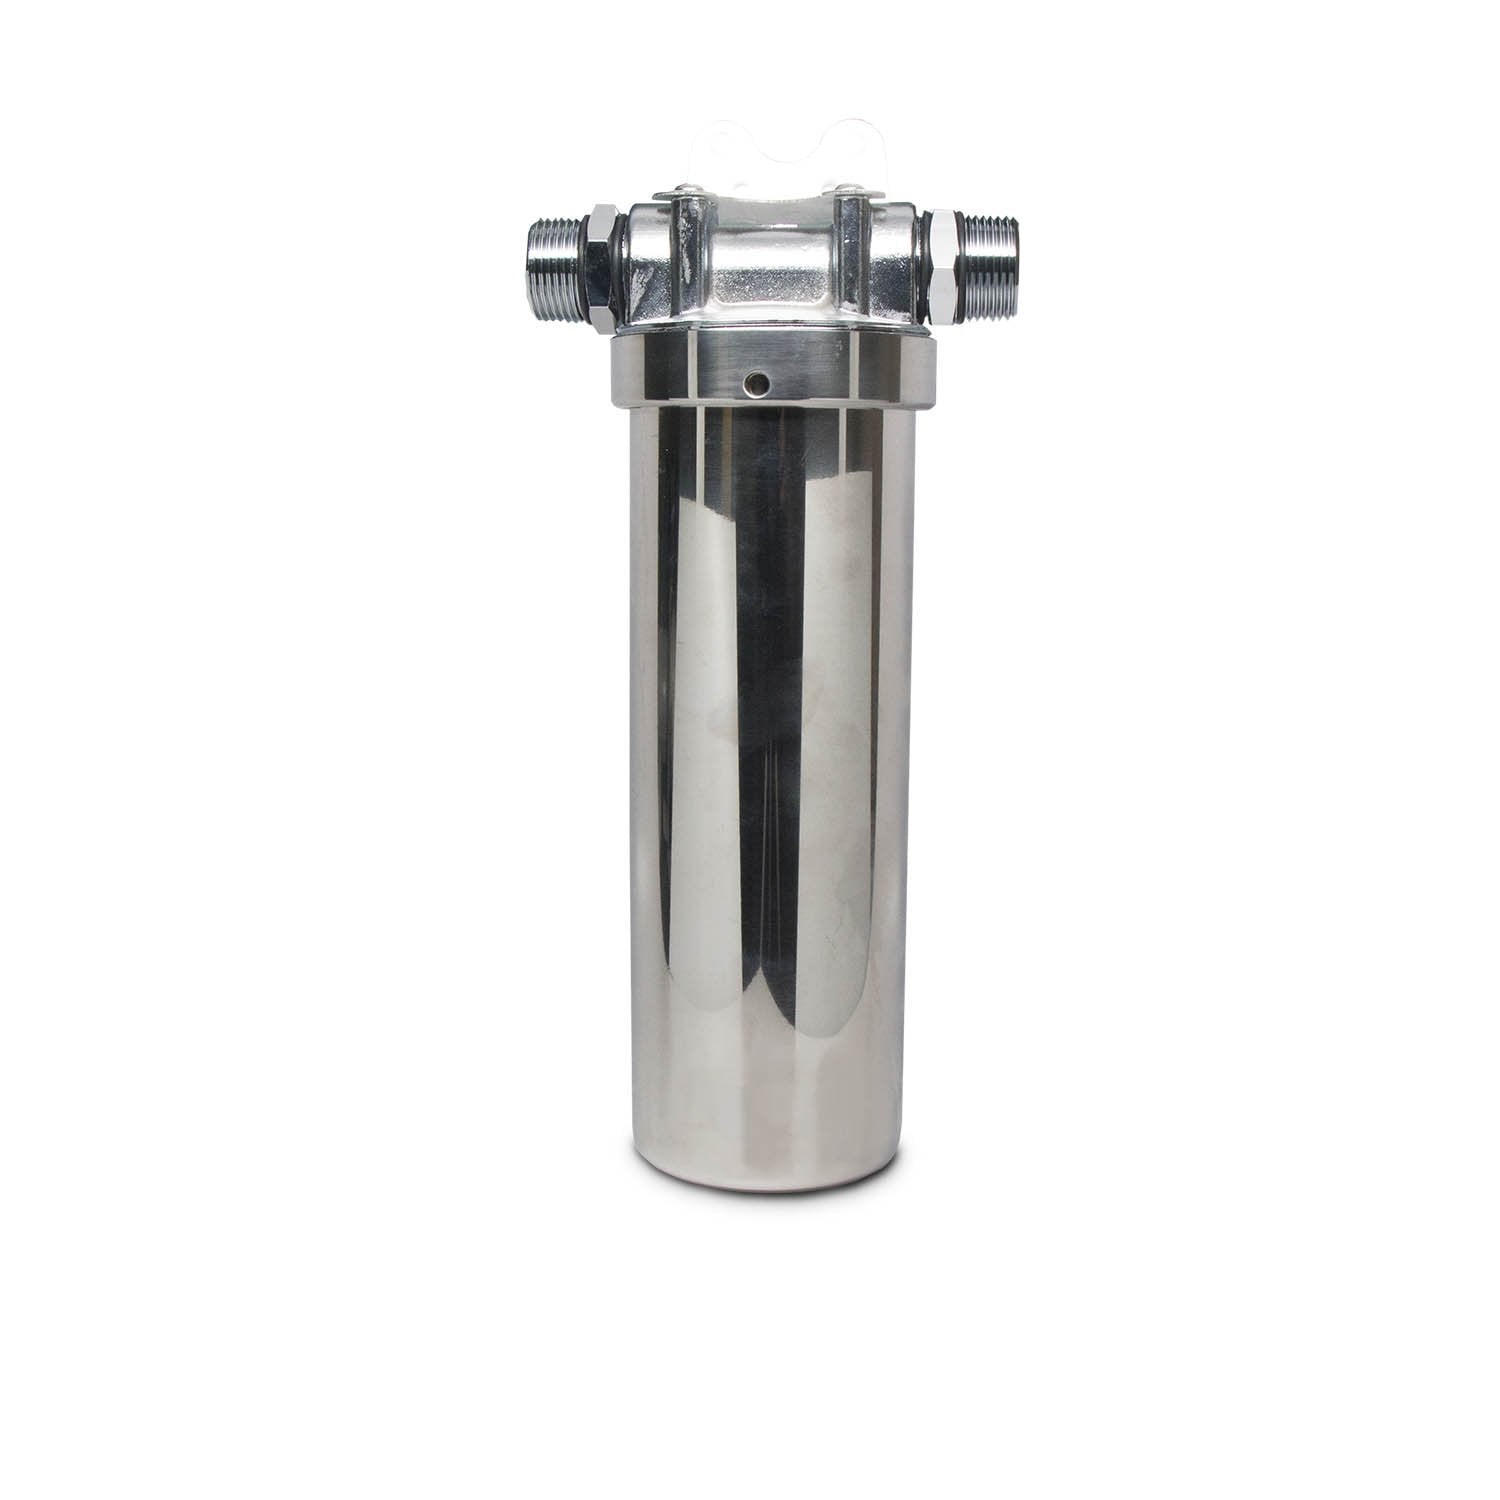 2.5" x 10" Stainless Steel Sump and Cap Assembly - Parts - Crystal Quest Water Filters